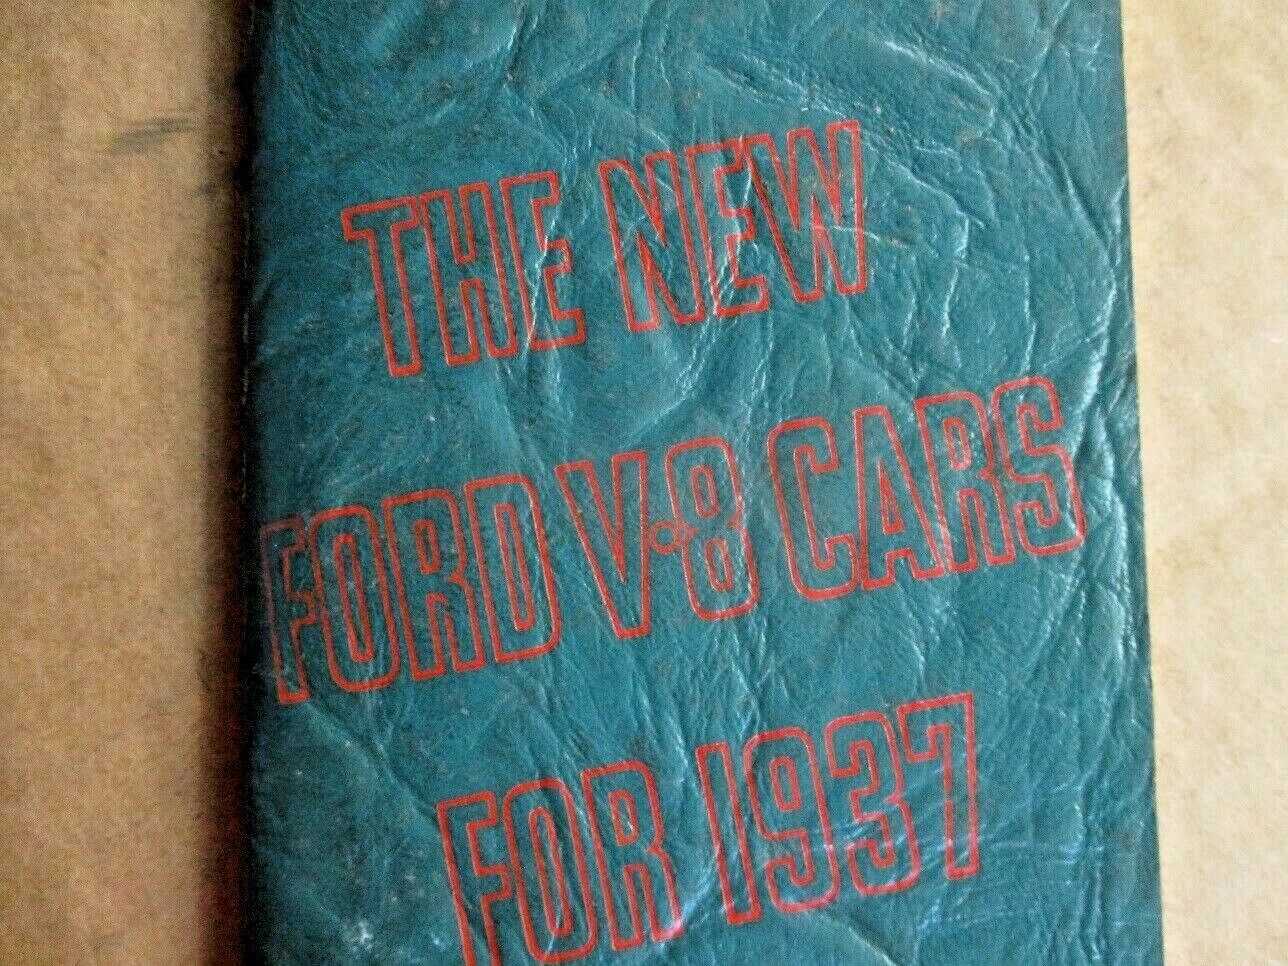 ORIGINAL- MINT 1937 FORD SALESMAN HAND BOOK FOR THE NEW FORD V8 CARS FOR 1937